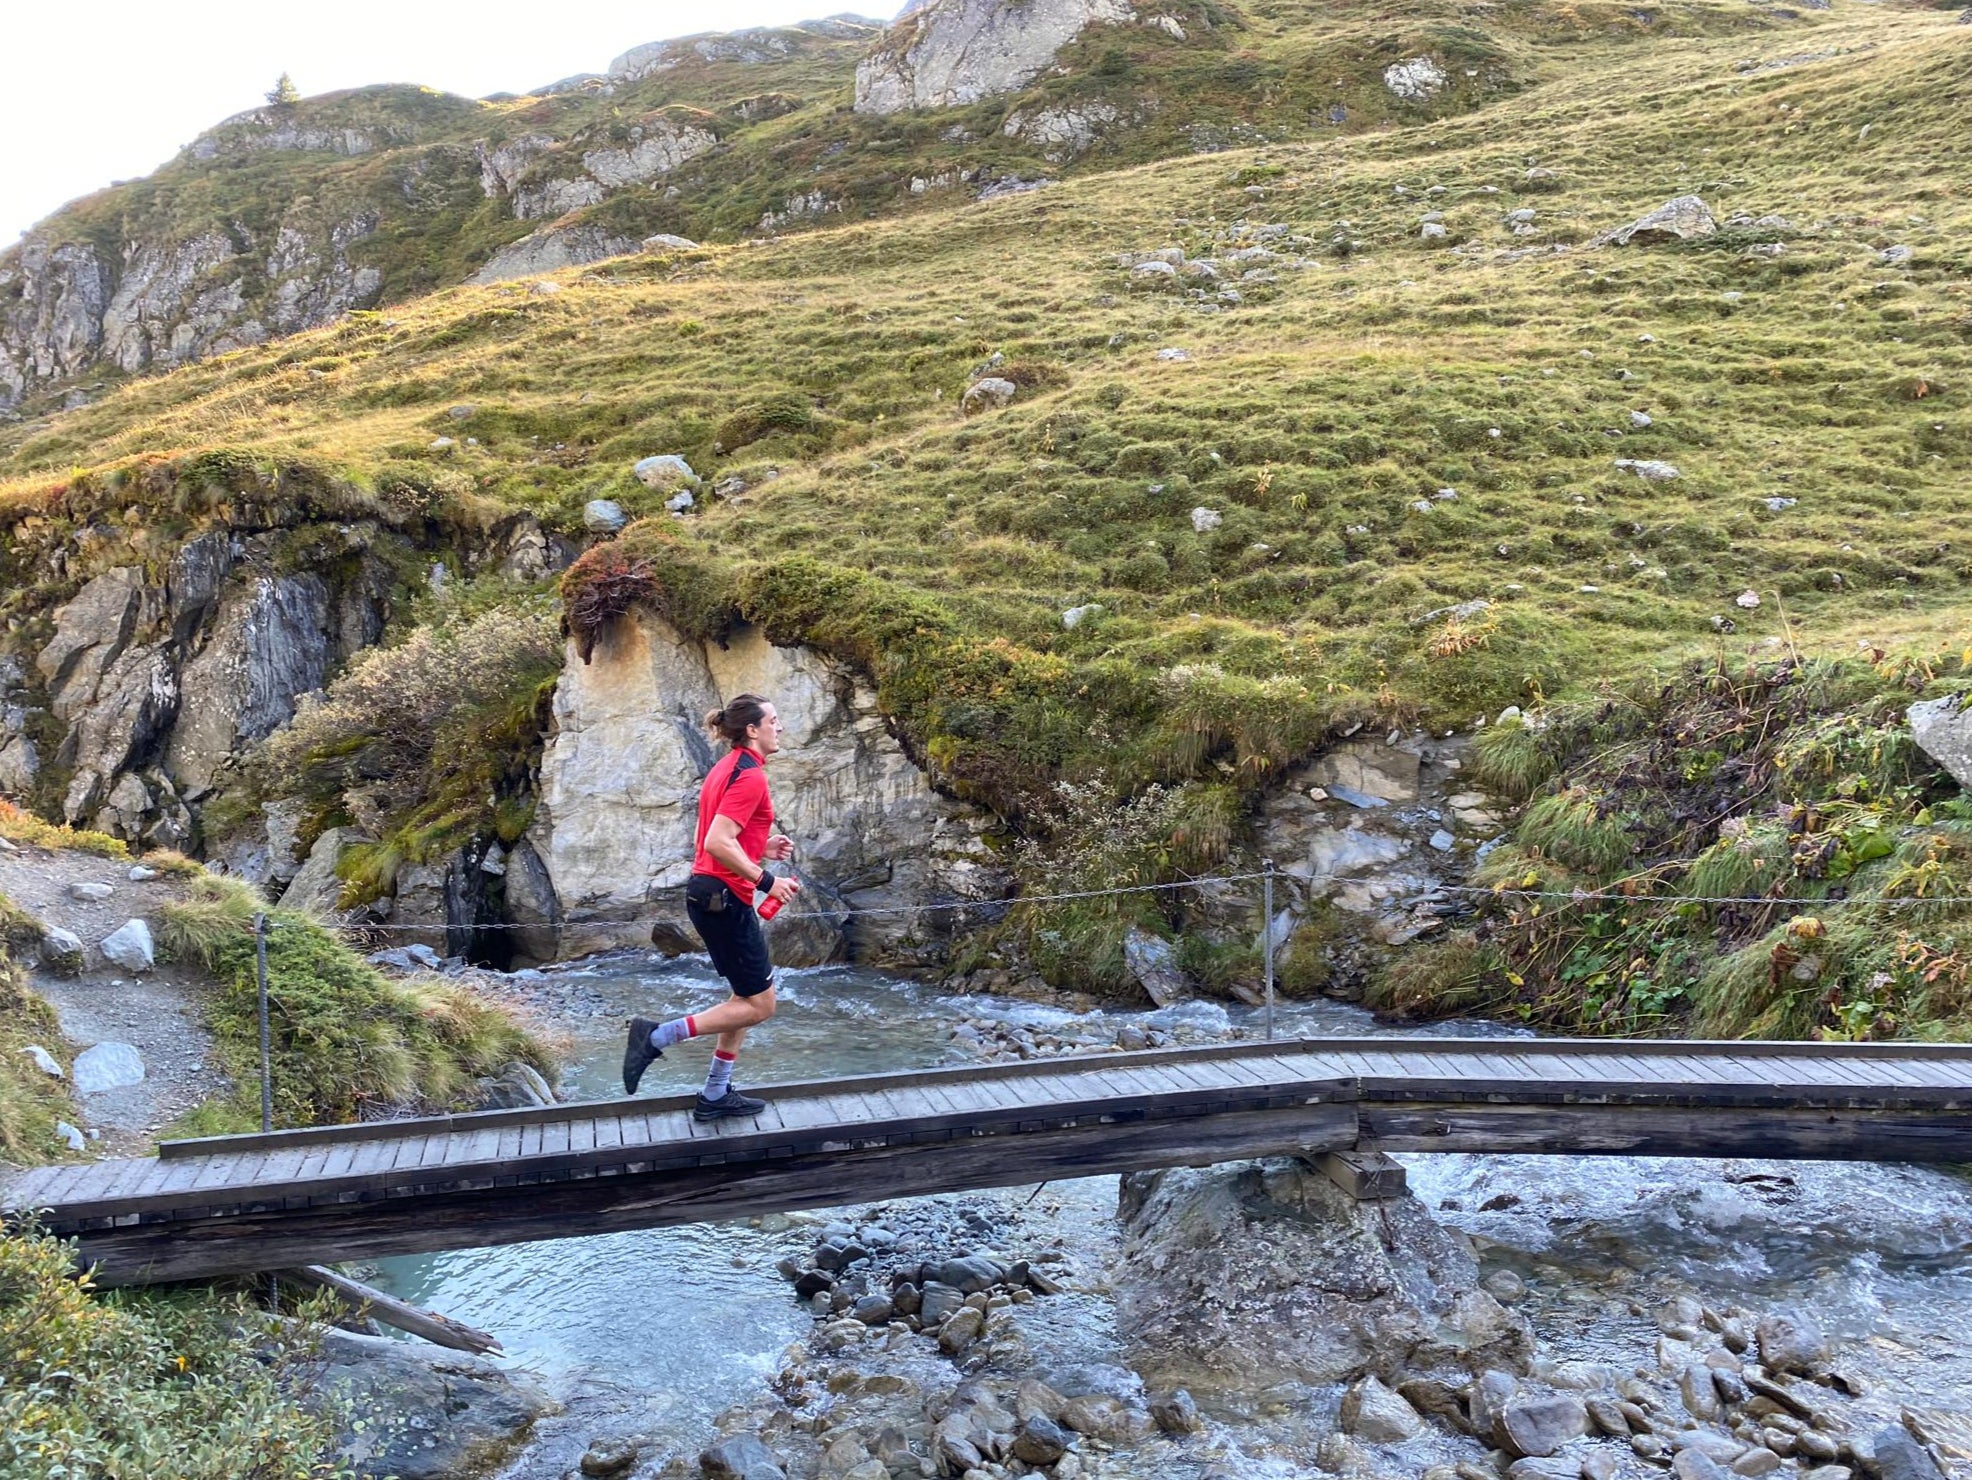 Trail running can be the best way to experience Verbier’s peaks and troughs